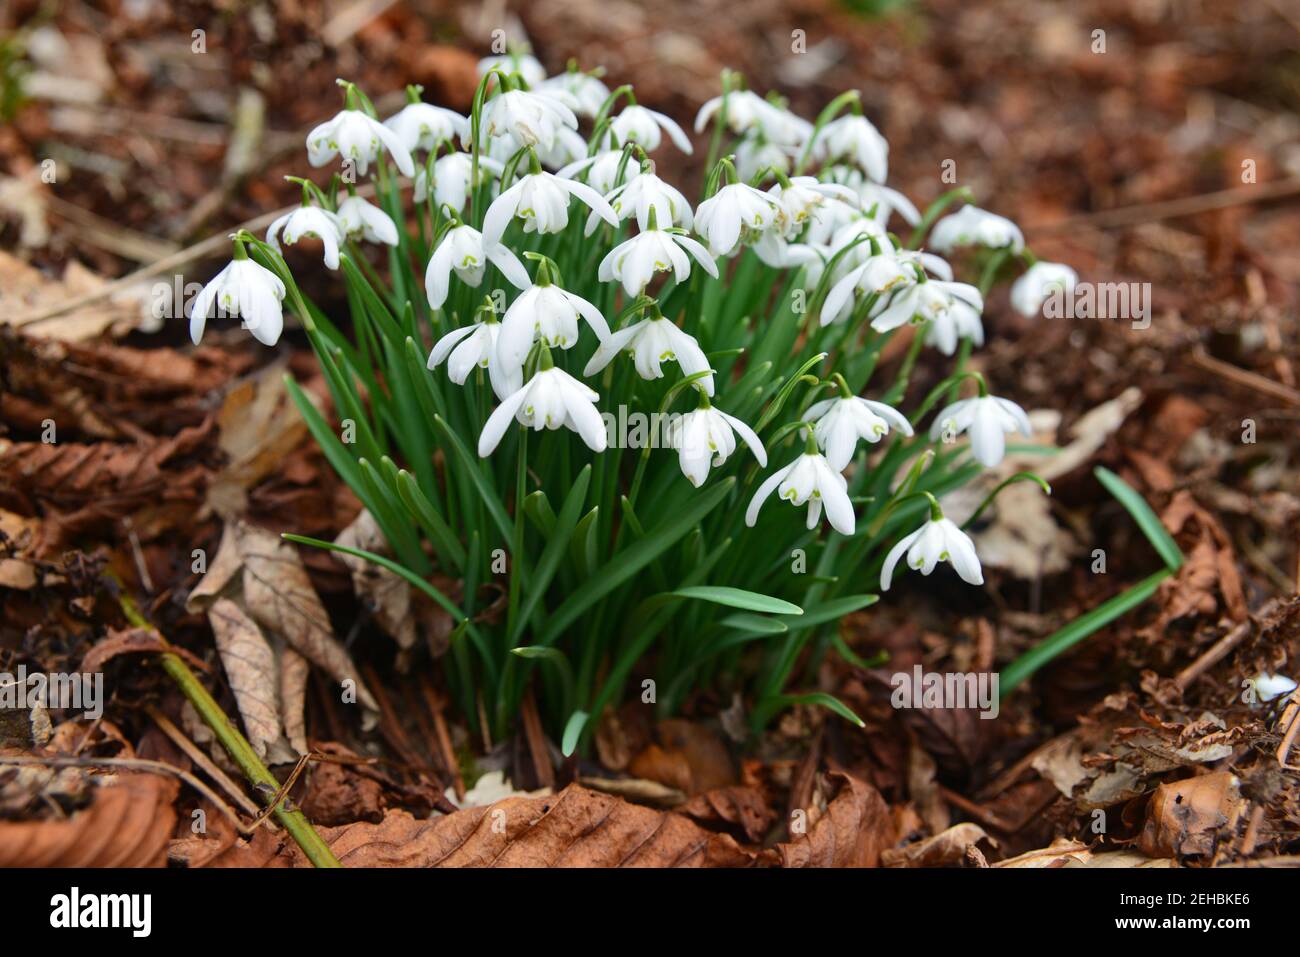 White English Snowdrops emerging from the ground in the ancient woodland in England, UK. Stock Photo